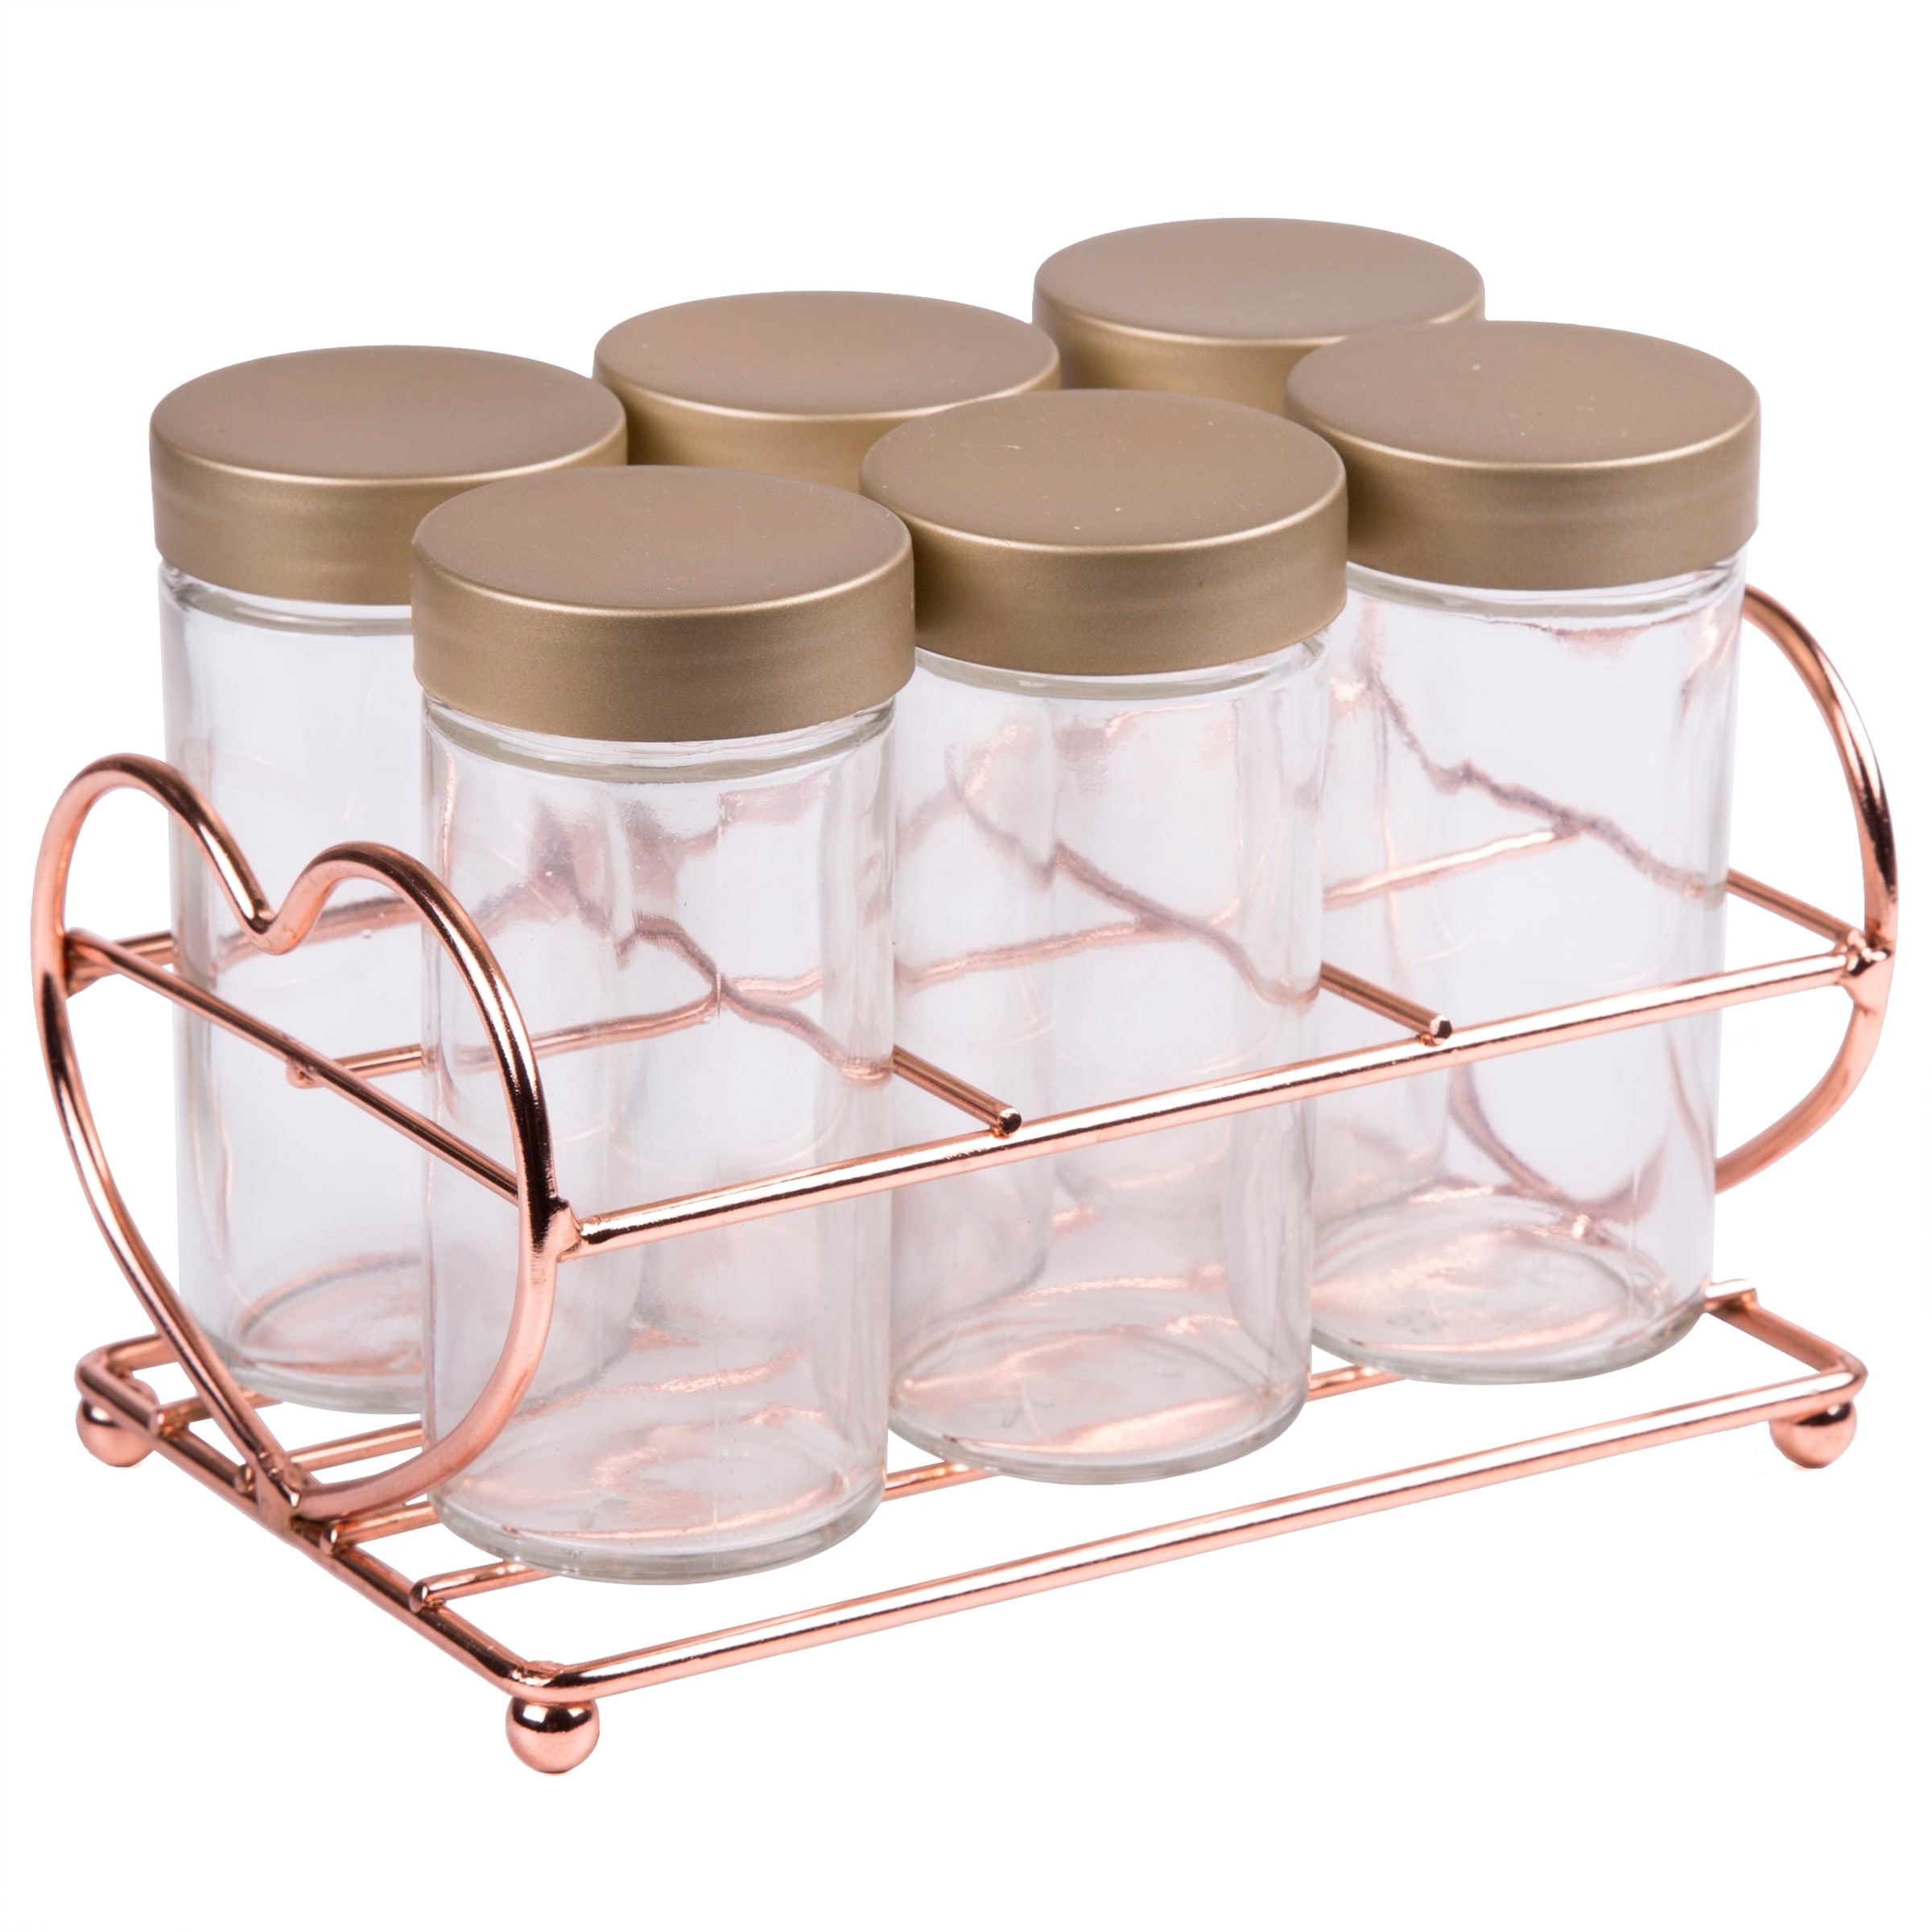 https://ak1.ostkcdn.com/images/products/30138532/Creative-Home-Set-of-6-Glass-Spice-Bottle-Jar-with-Copper-Finished-Rack-Organizer-3f3f86c4-9fa9-4b9b-b149-ea23a79e08da.jpg